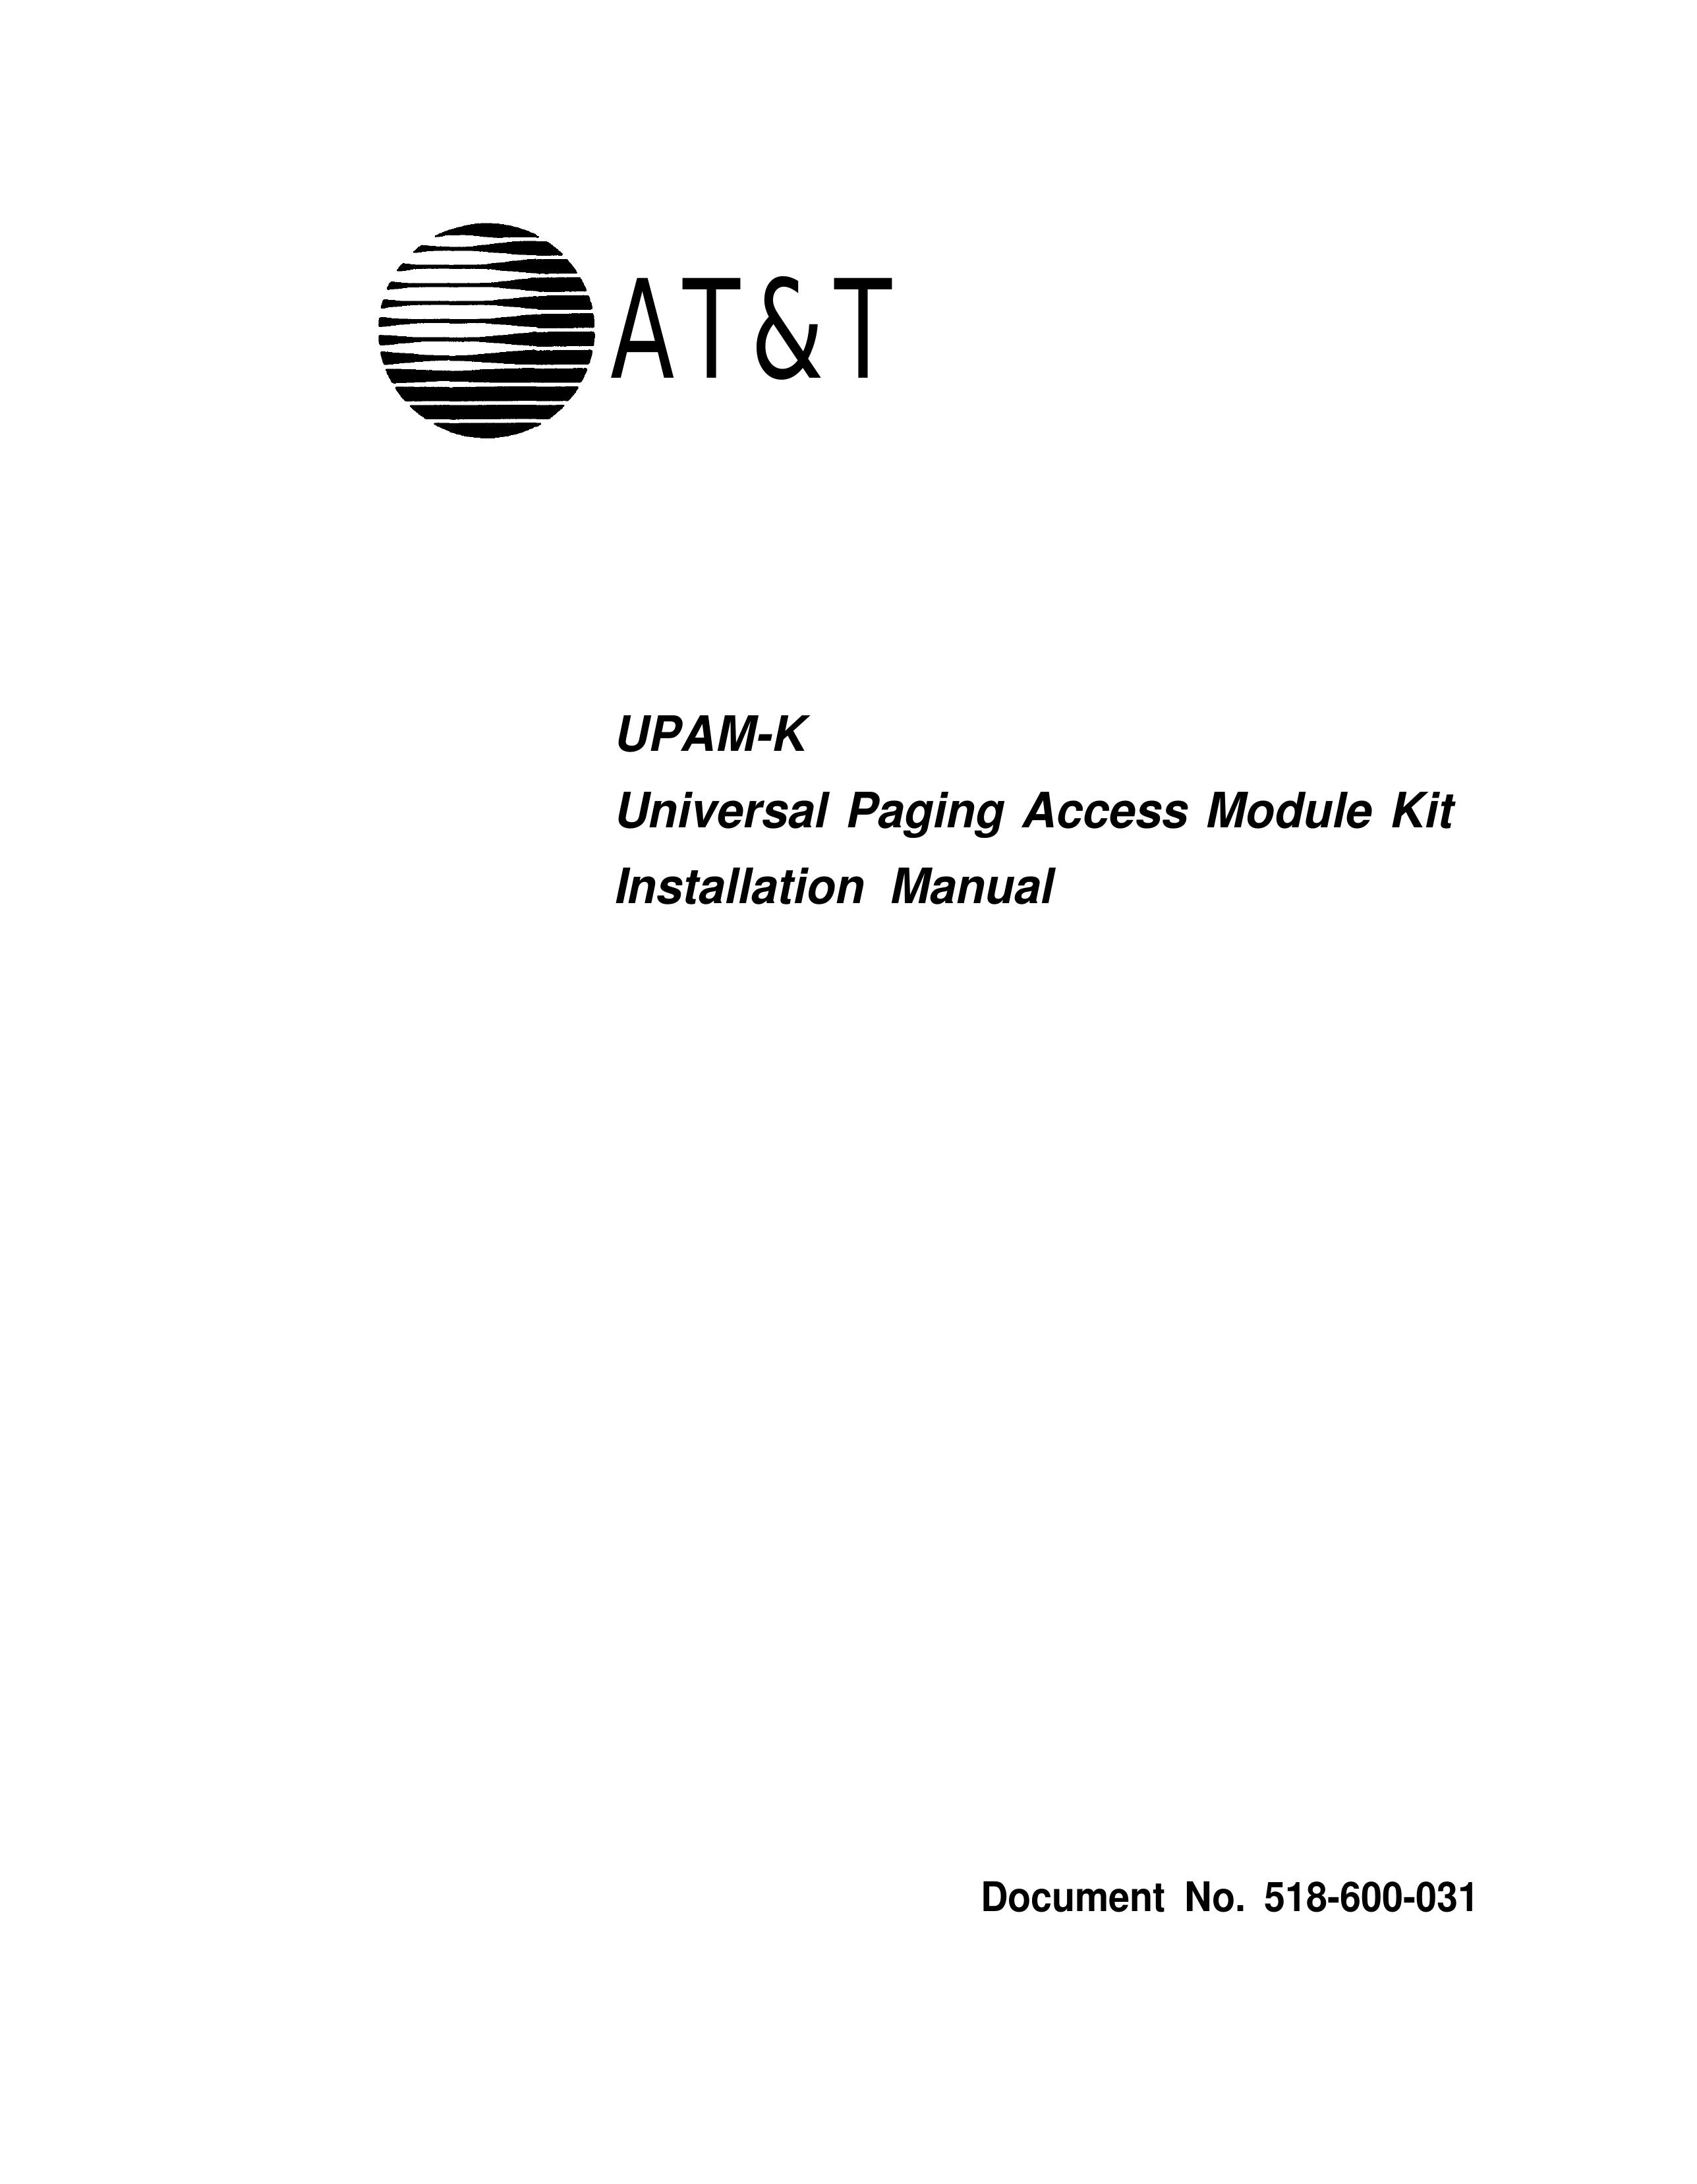 AT&T UPAM-K Drums User Manual (Page 1)